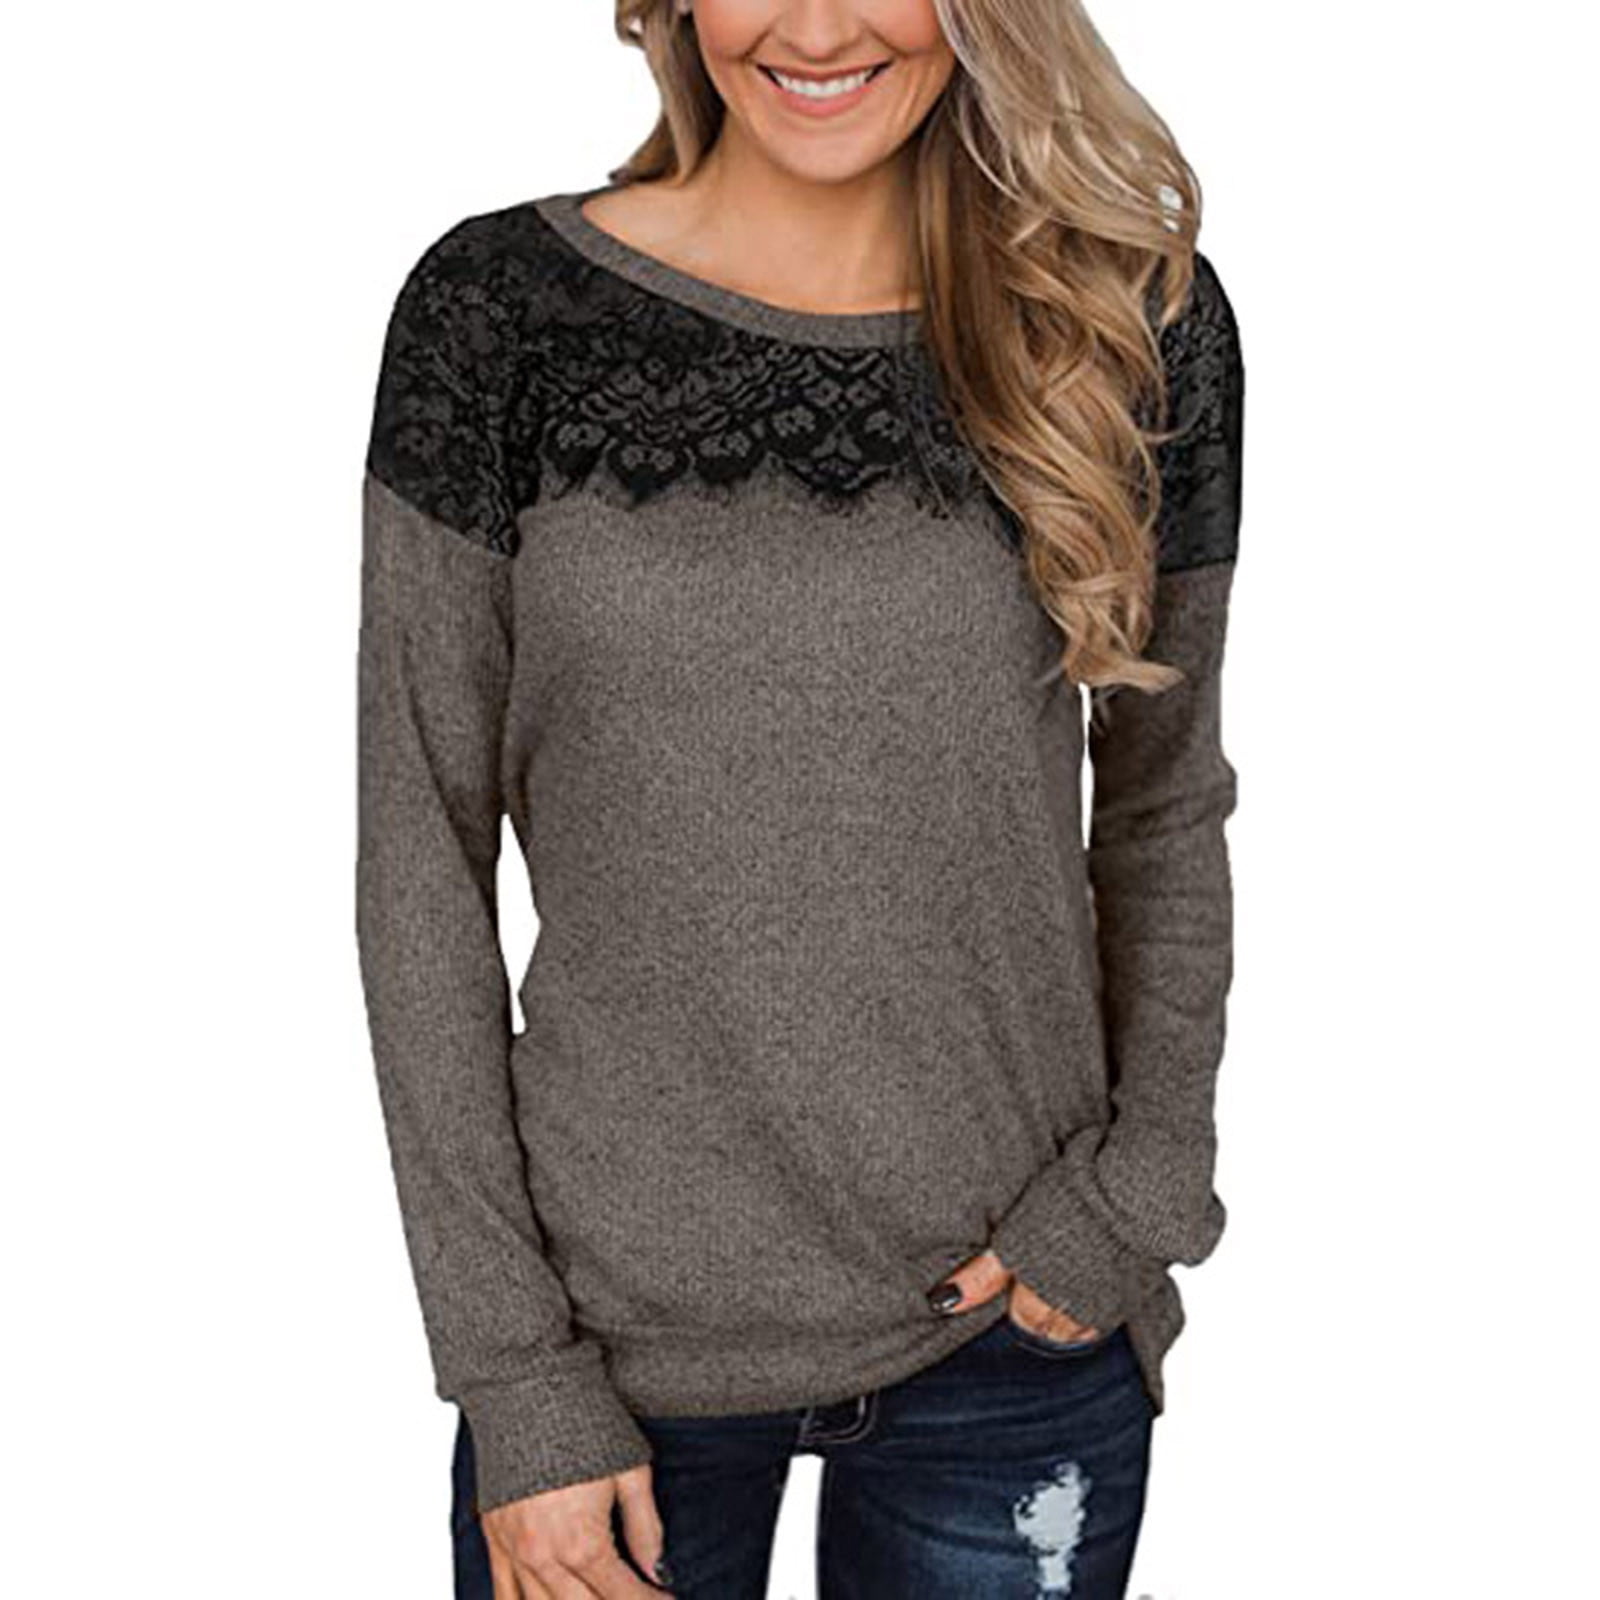 ⭐Plus Size Womens Ladies Lace Tops T Shirts Crew Neck Pleated Pullover Blouse